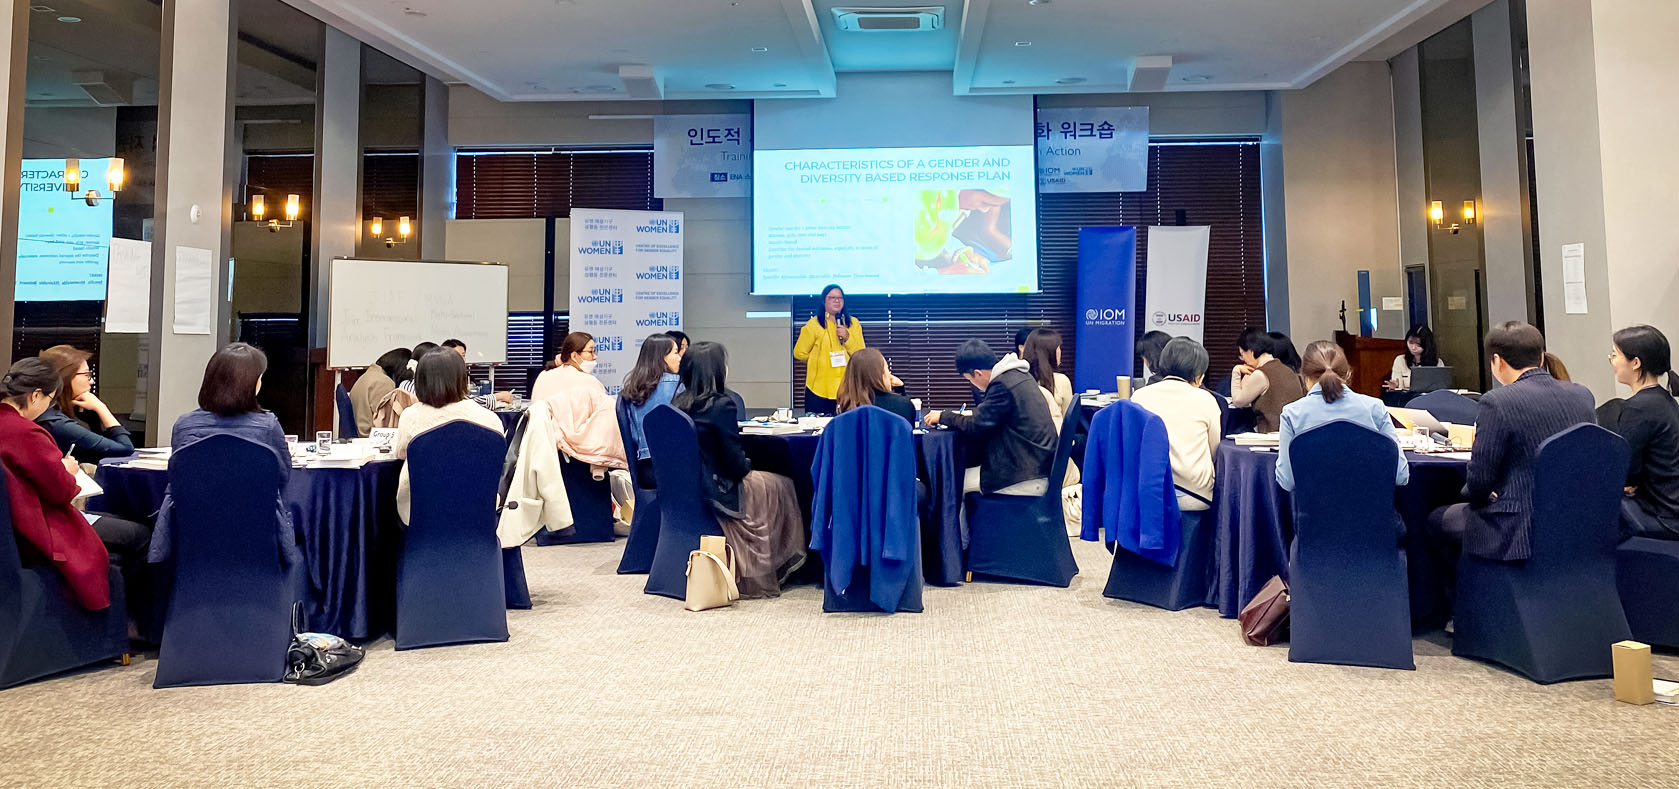 Rowena Dacsig of UN Women Myanmar gives a presentation on characteristics of a gender and diversity based response plan to the group at the Training Workshop on Mainstreaming Gender Humanitarian Action, on 29 March 2023. Photo: IOM Republic of Korea